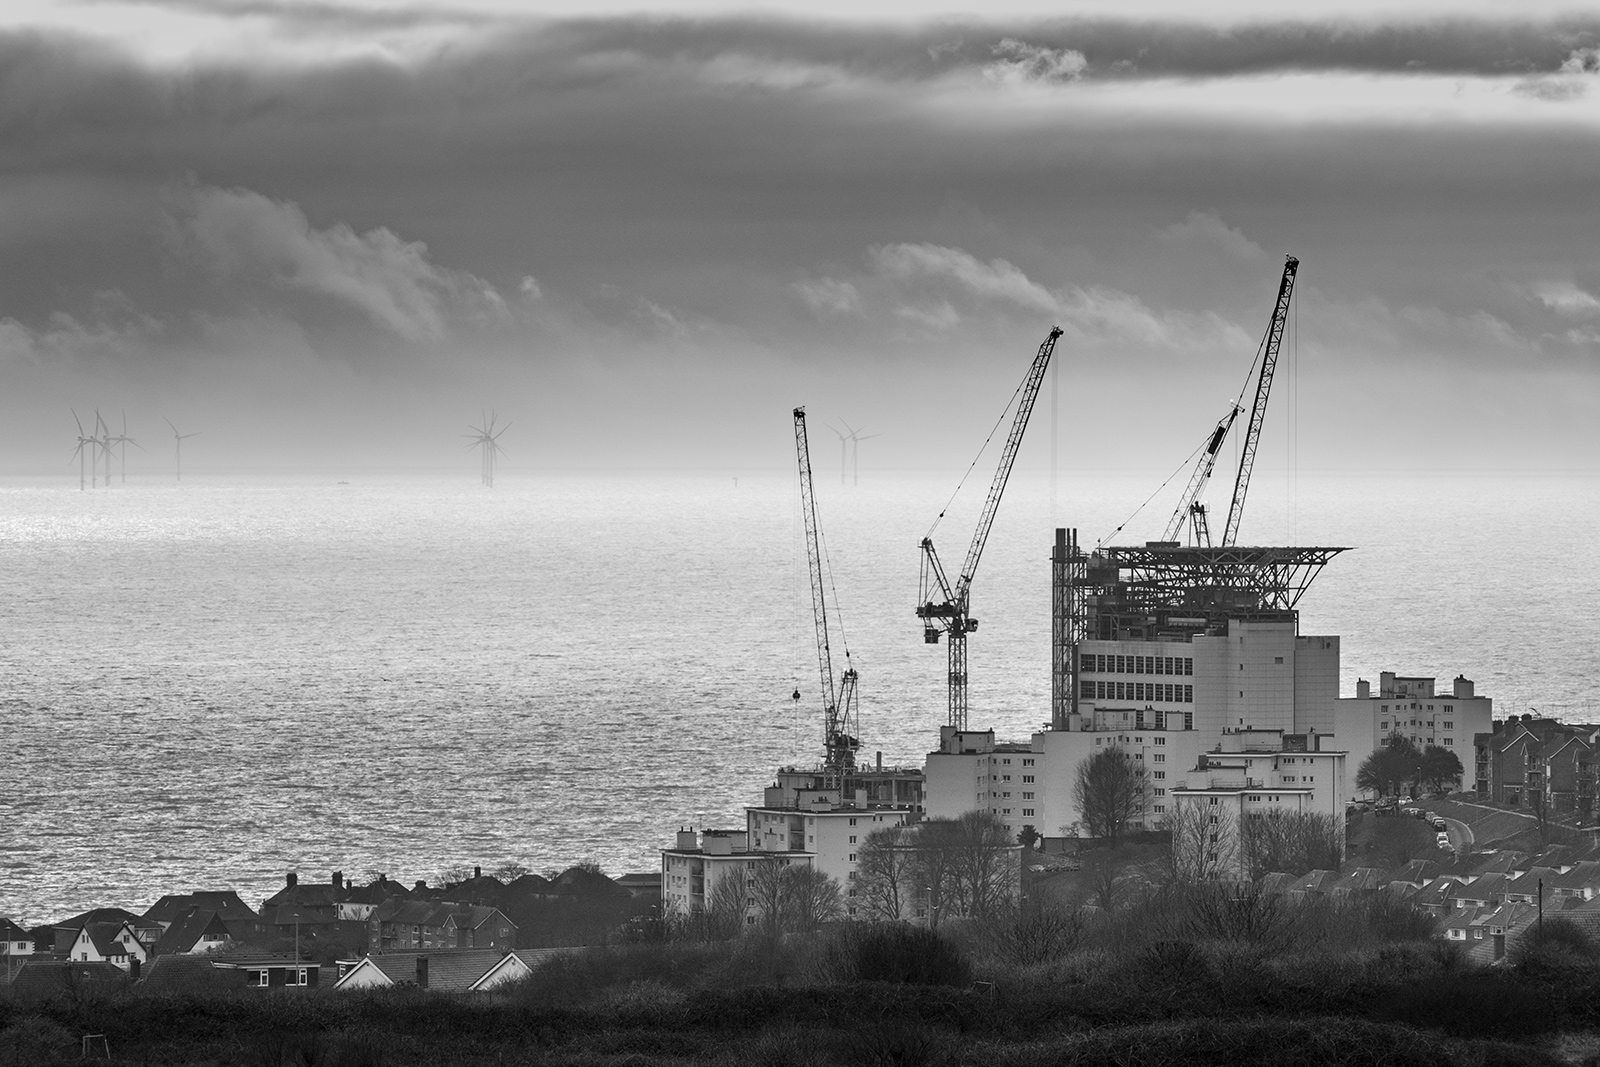 Construction work with cranes at Royal Sussex County Hospital with seascape and sky in background, black and white landscape photography Brighton Sussex UK ©P. Maton 2019 eyeteeth.net